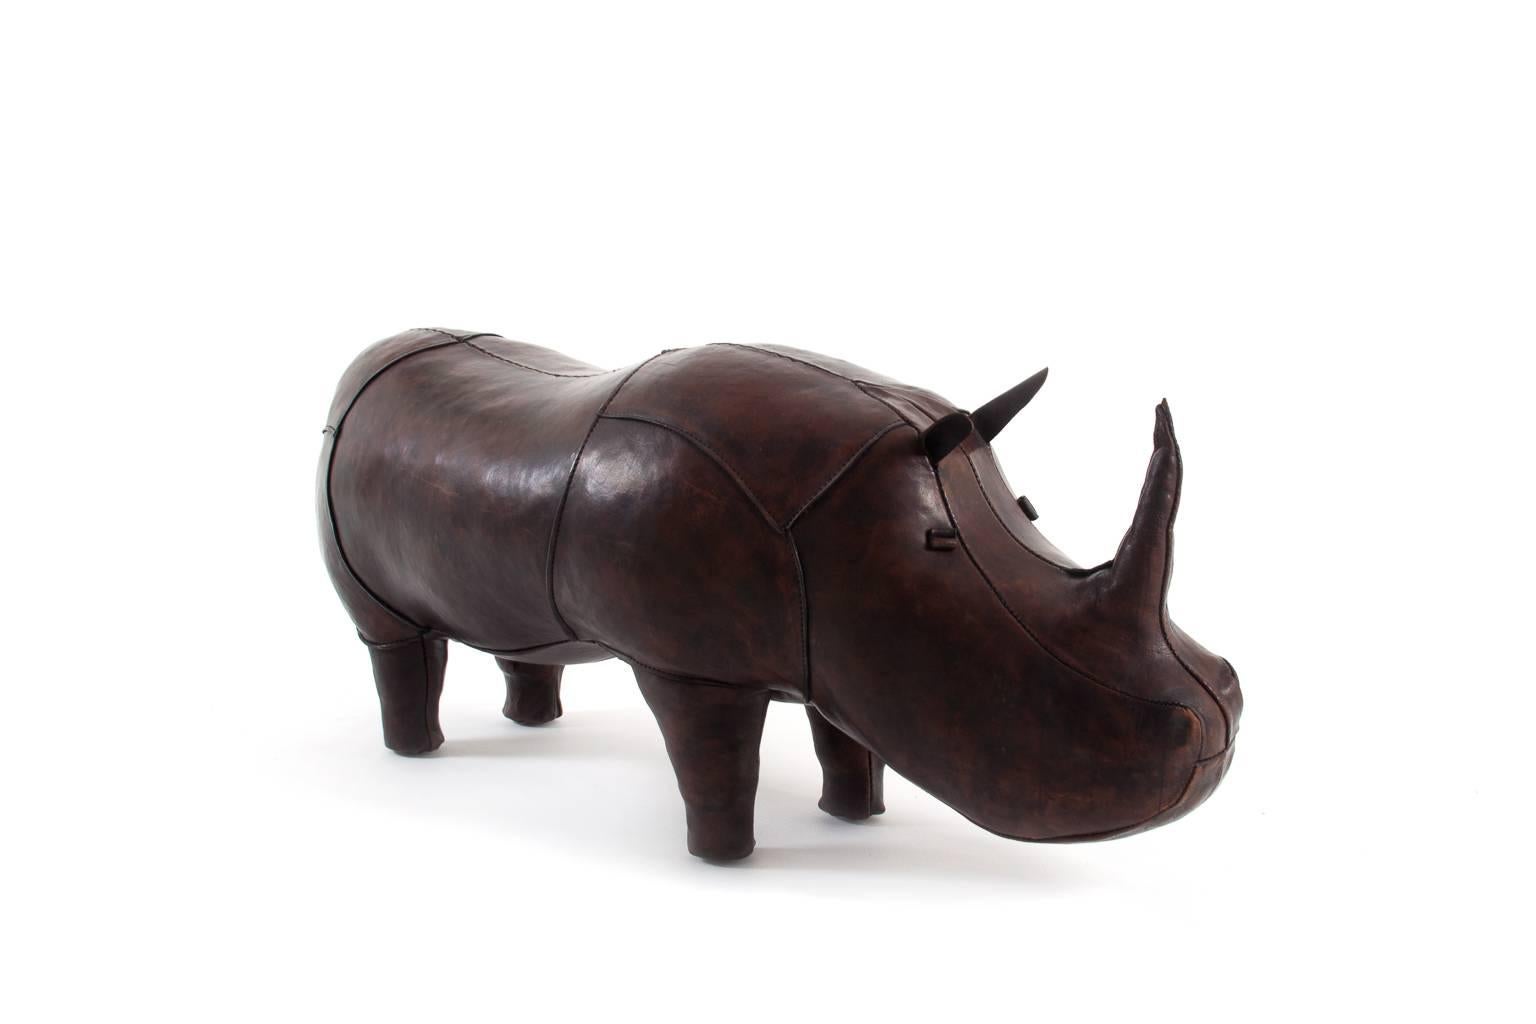 Original leather rhinoceros footstool by Dimitri Omersa for Abercrombie & Fitch, London, 1960. Handcrafted from the best quality cowhide leather, filled with hay. Beautiful original piece, signed 'Made in England.' Collectors item with a lovely